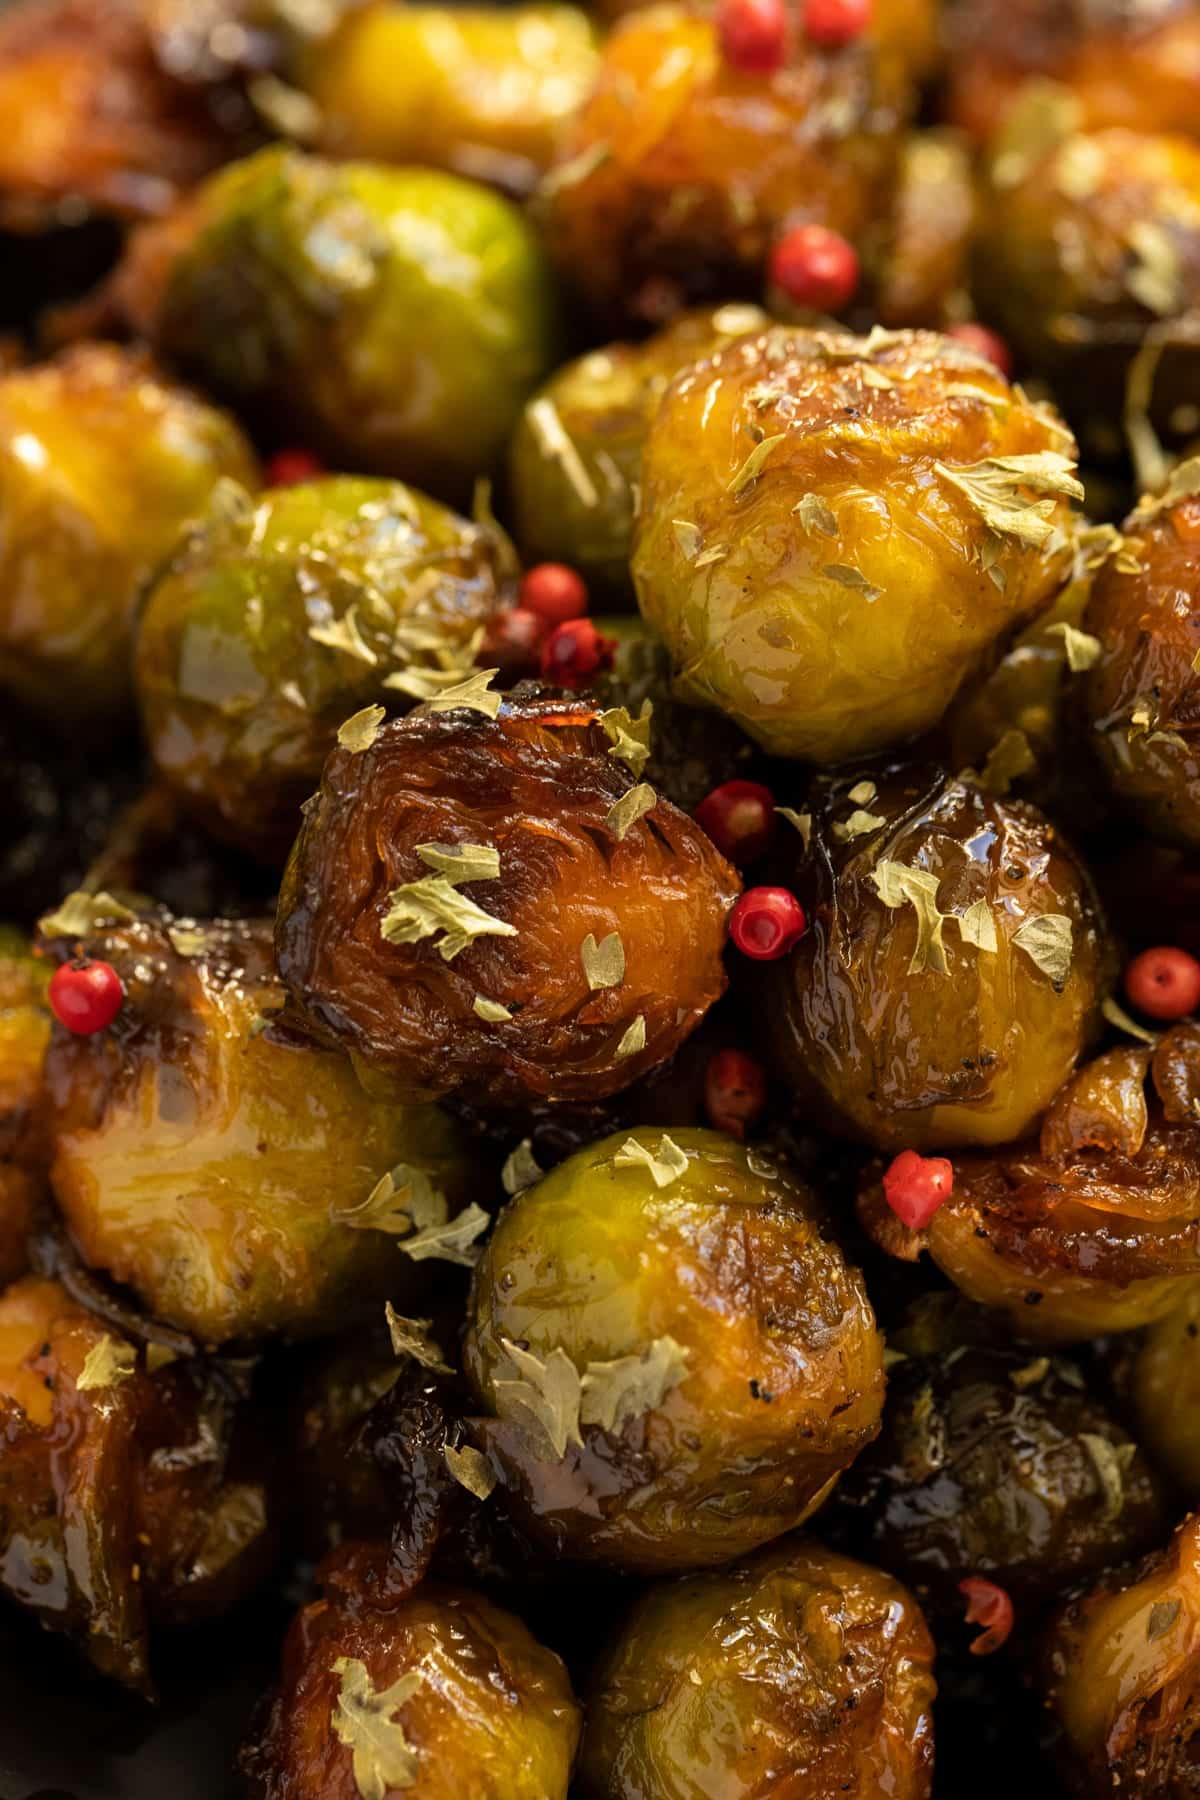 many caramelized sprouts sprinkled with red peppercorns,